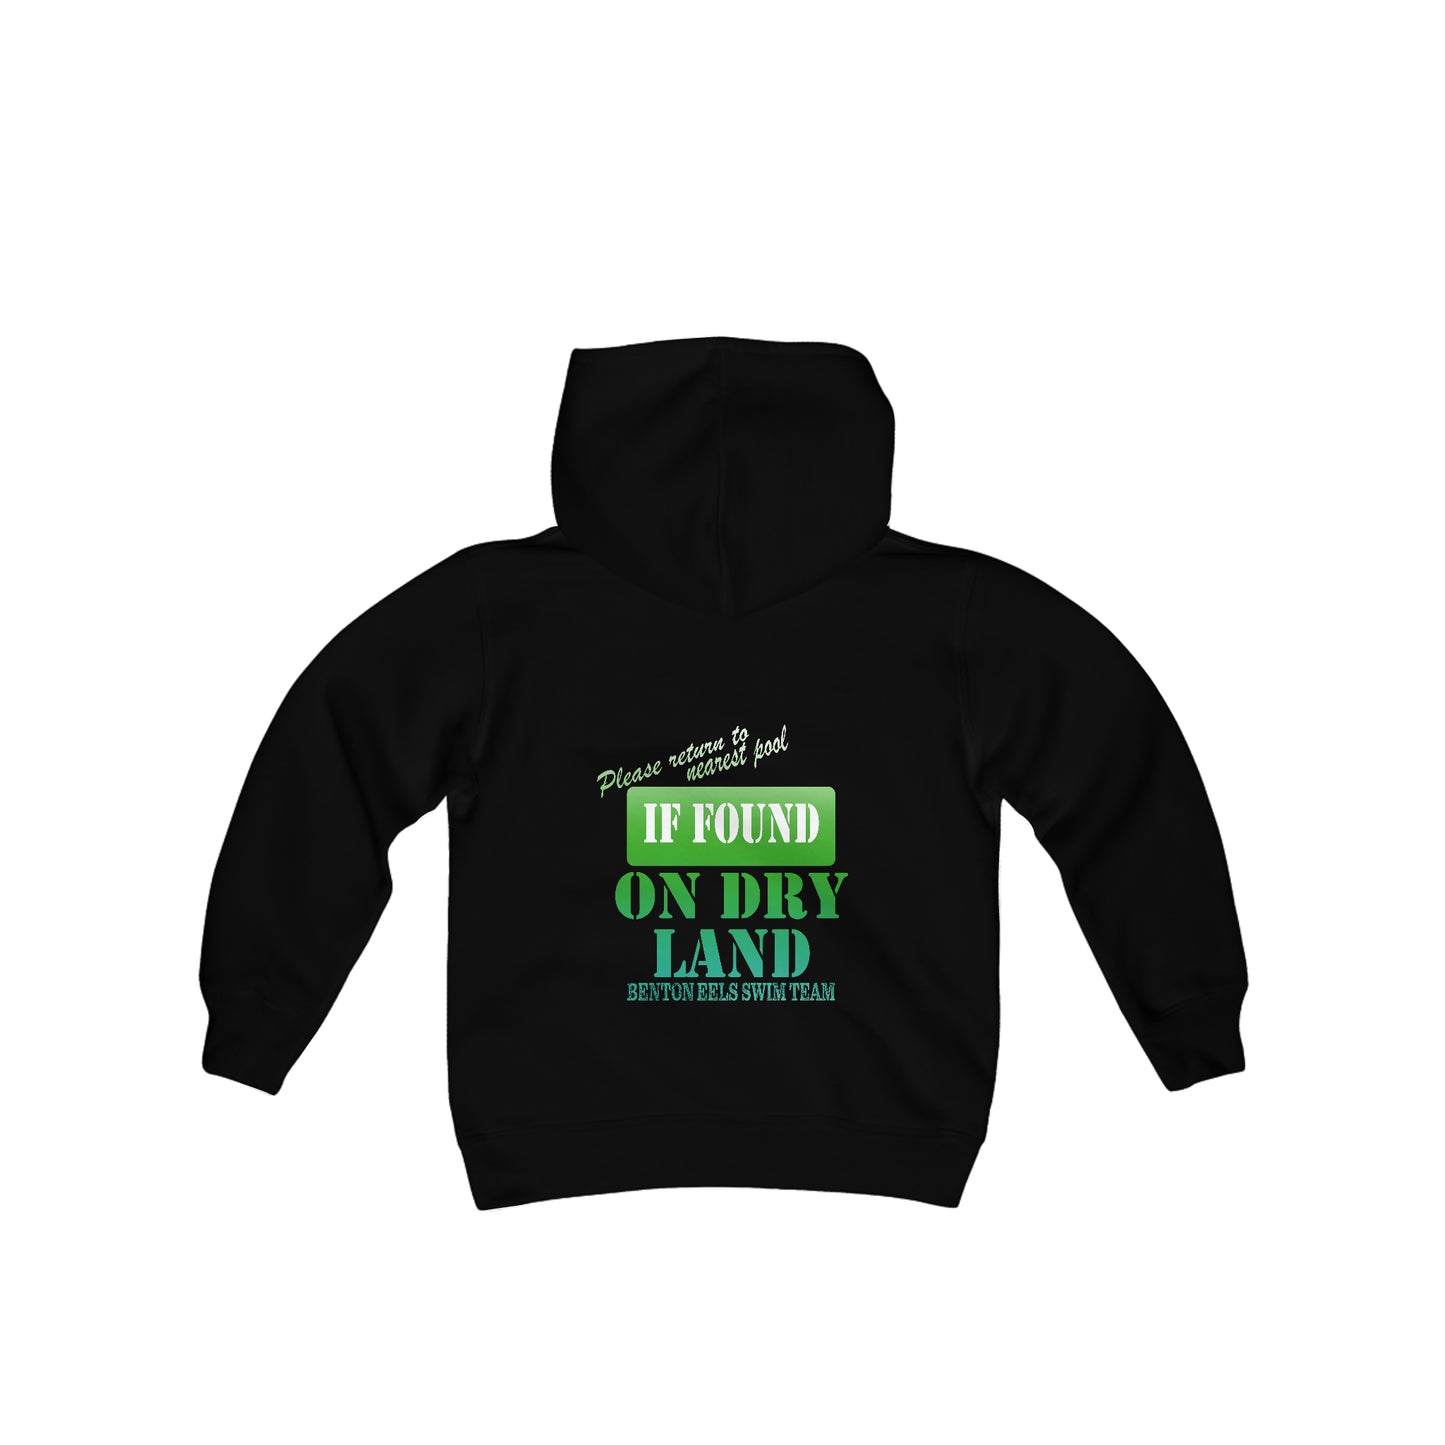 YOUTH HOODIE - IF FOUND ON DRY LAND